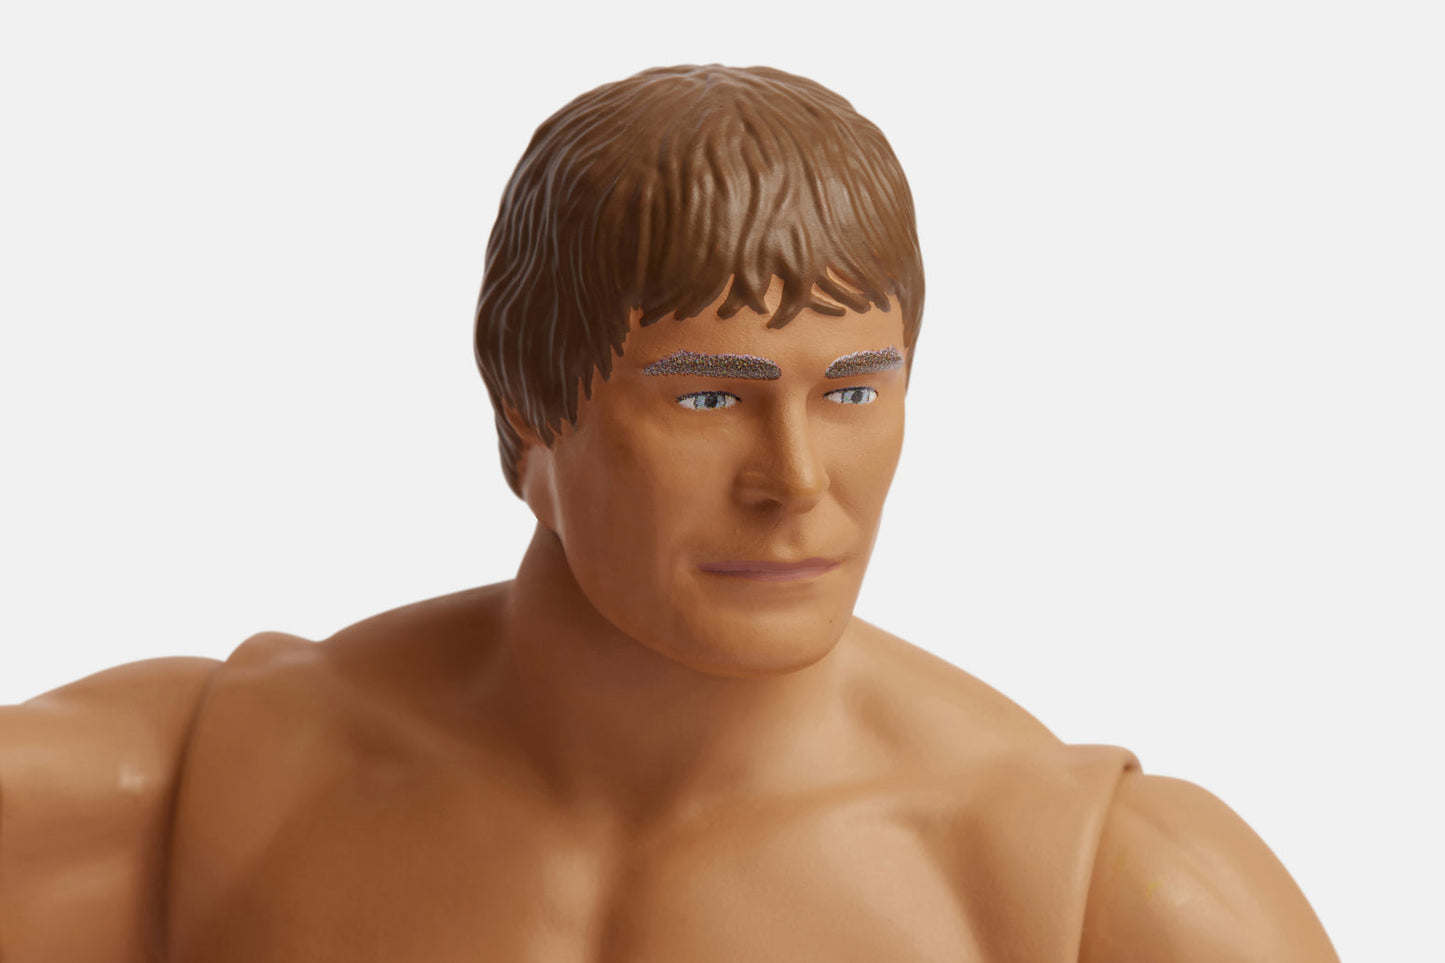 2024 A24 The Iron Claw Zac Efron as Kevin Von Erich Action Figure